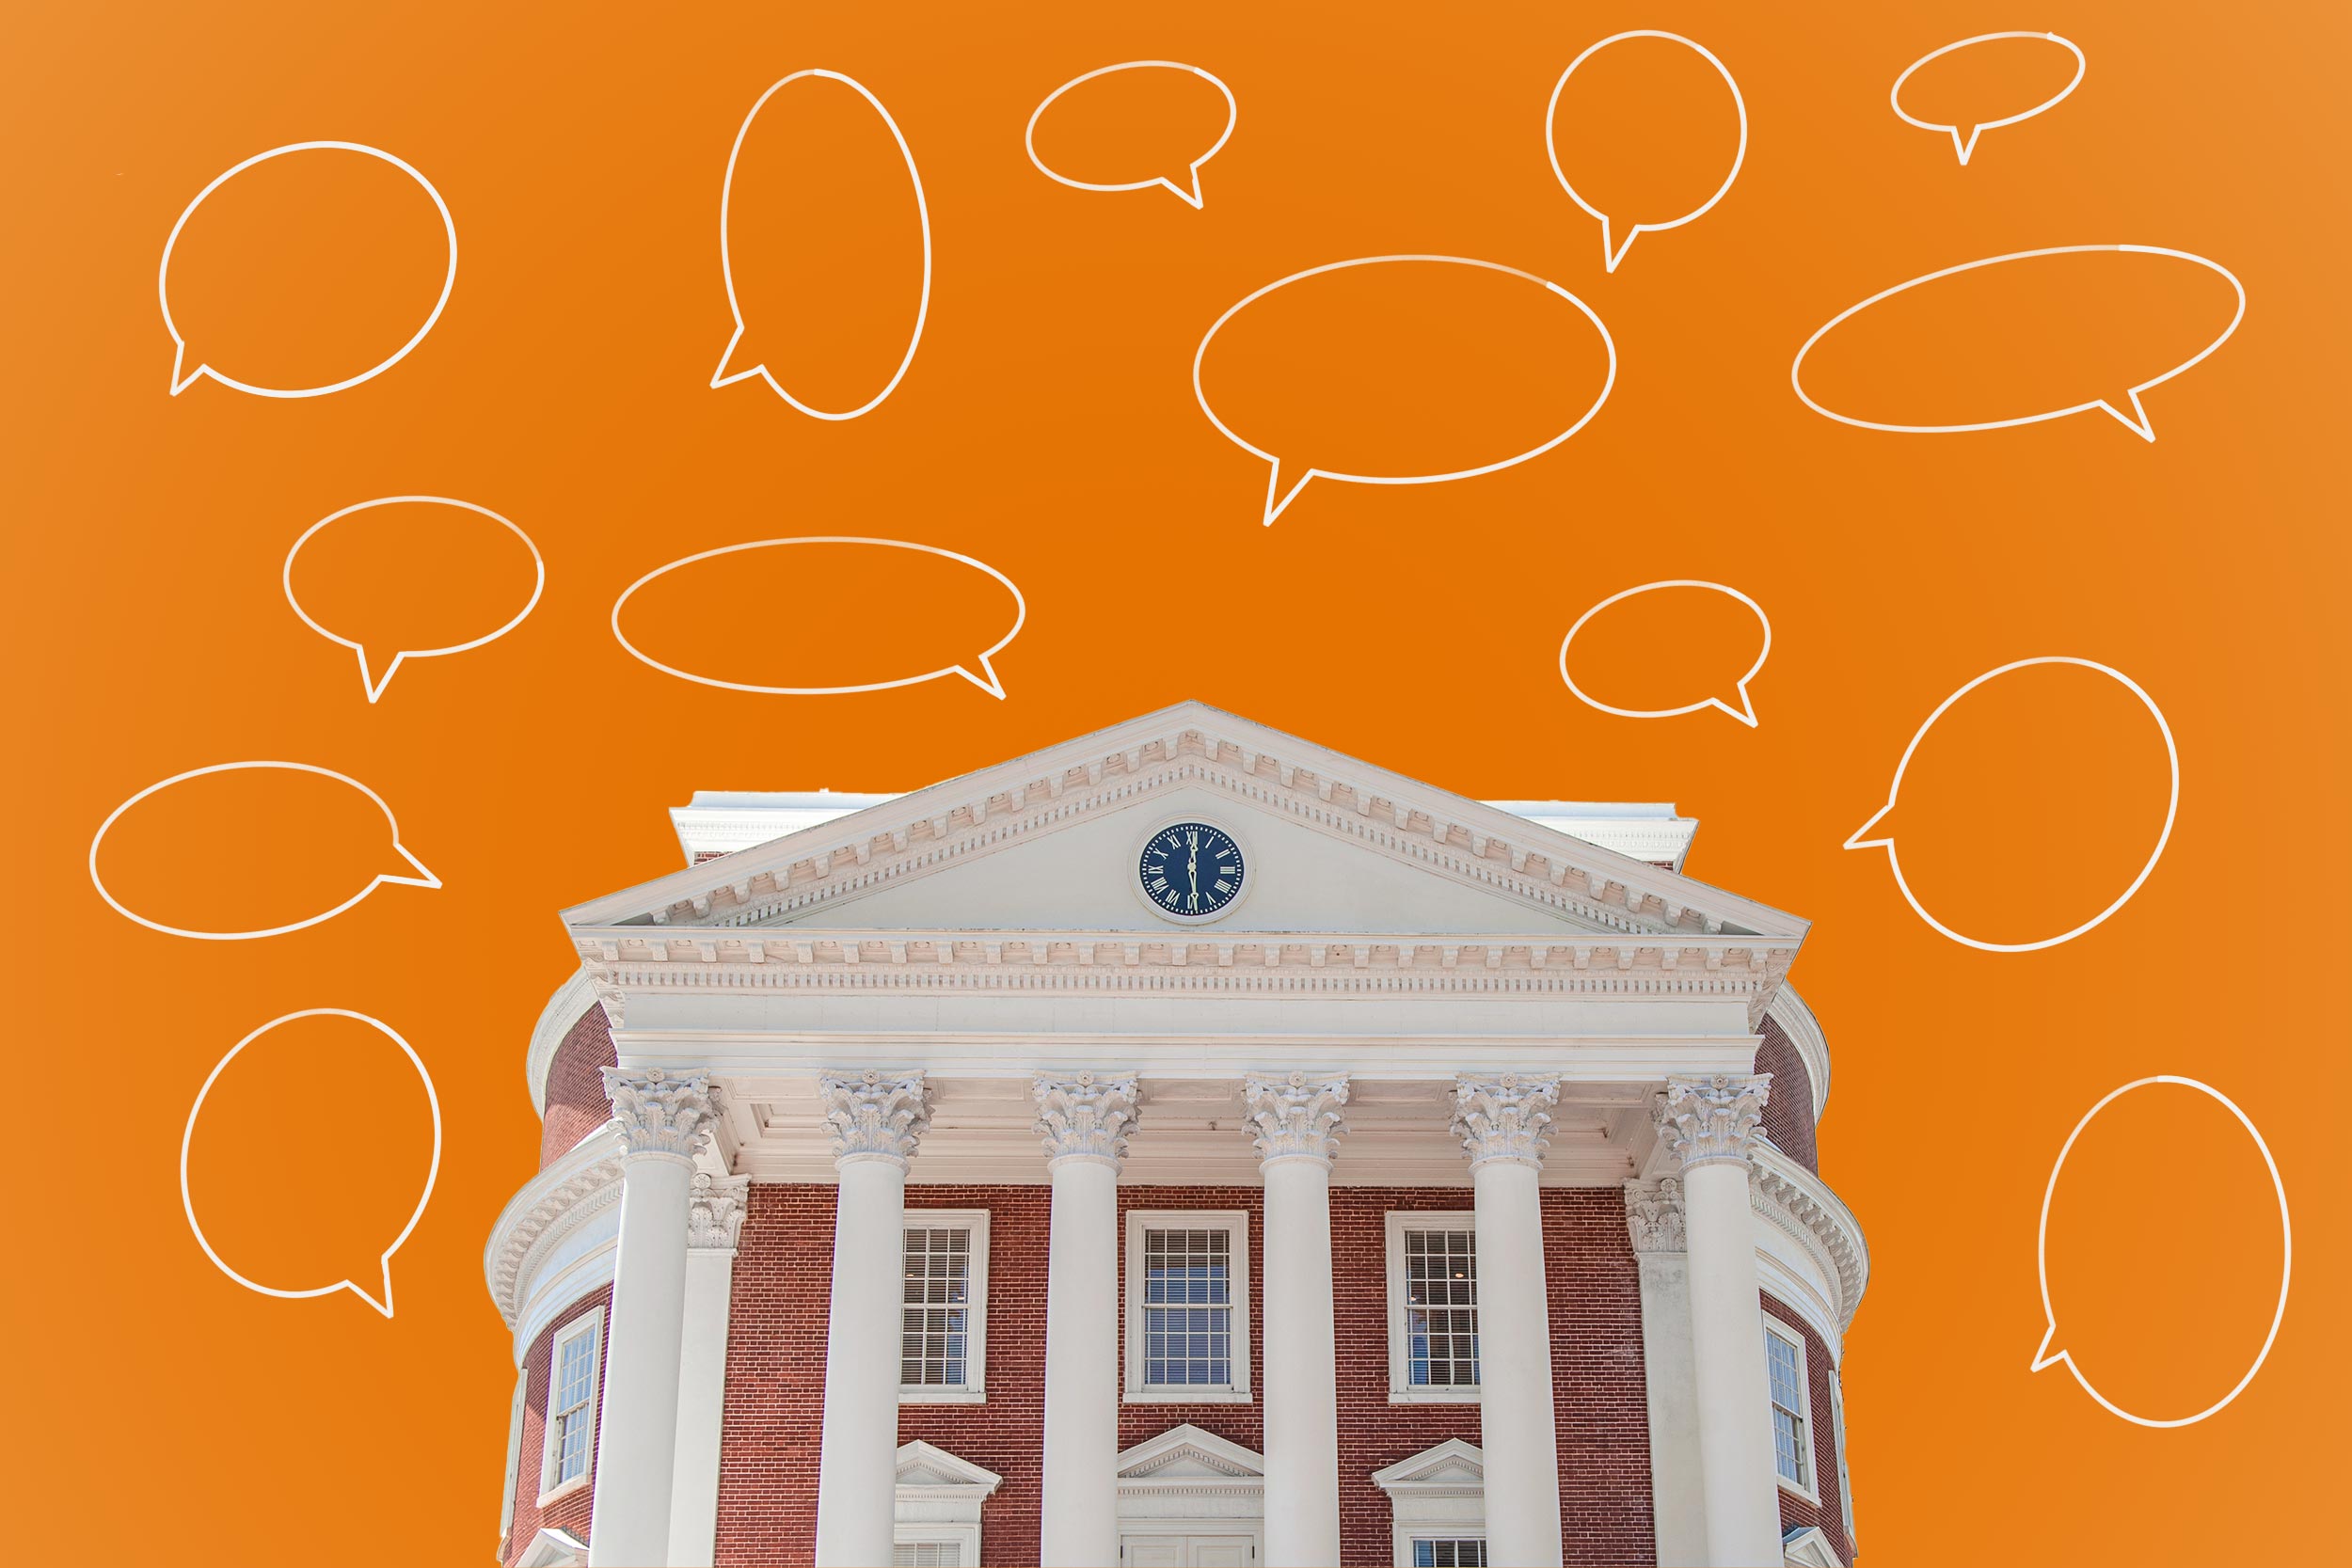 Rotunda with an orange background with speech bubbles overlayed